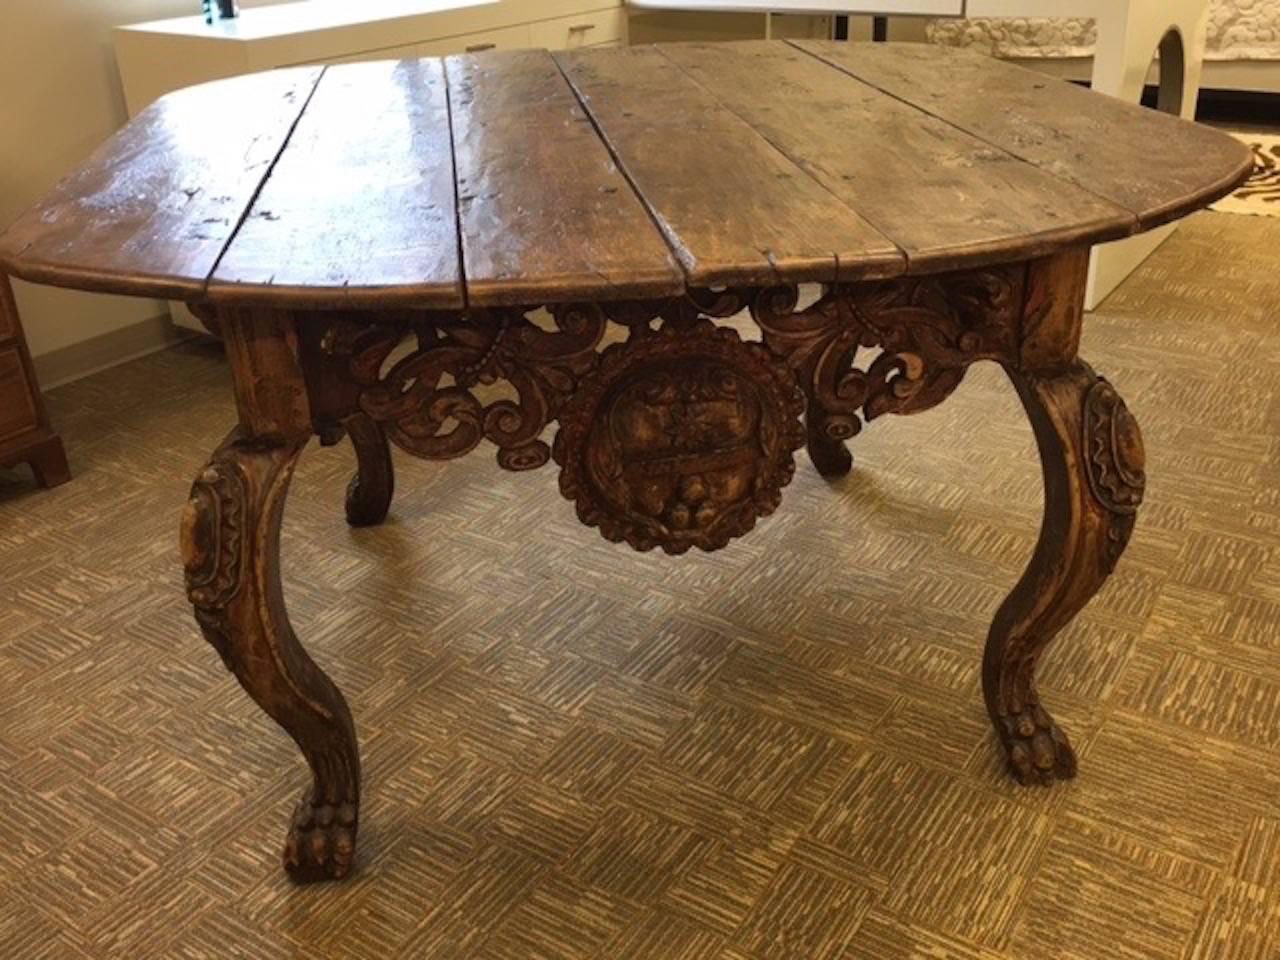 This amazingly detailed vestement table was acquired in Mexico but probably originated in South America. Each of the four sides is intricately carved with a different feature medallion. The original polychrome finish still shows traces of red and